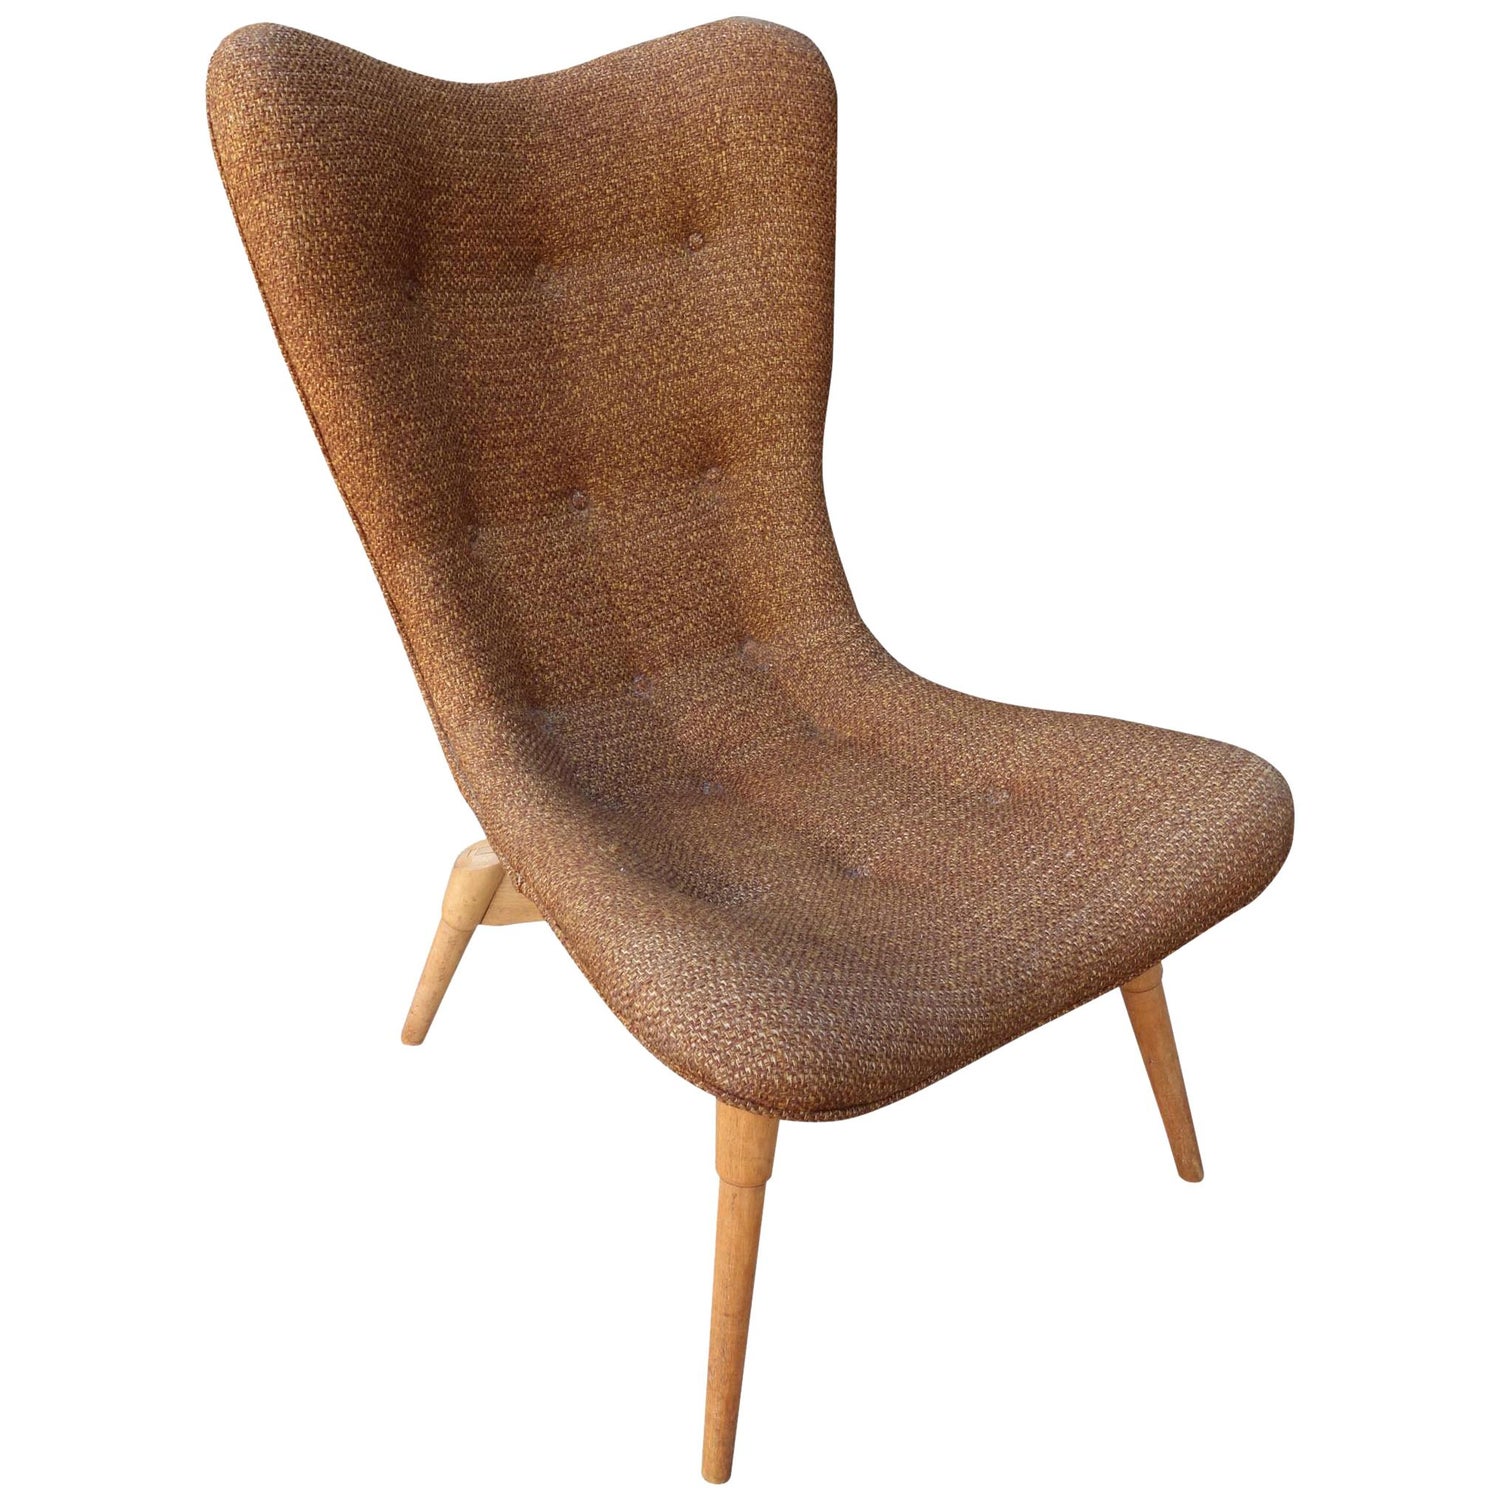 Australian Wood Lounge Chairs - 2 For Sale on 1stDibs | lounge chairs  melbourne, lounge chair australia